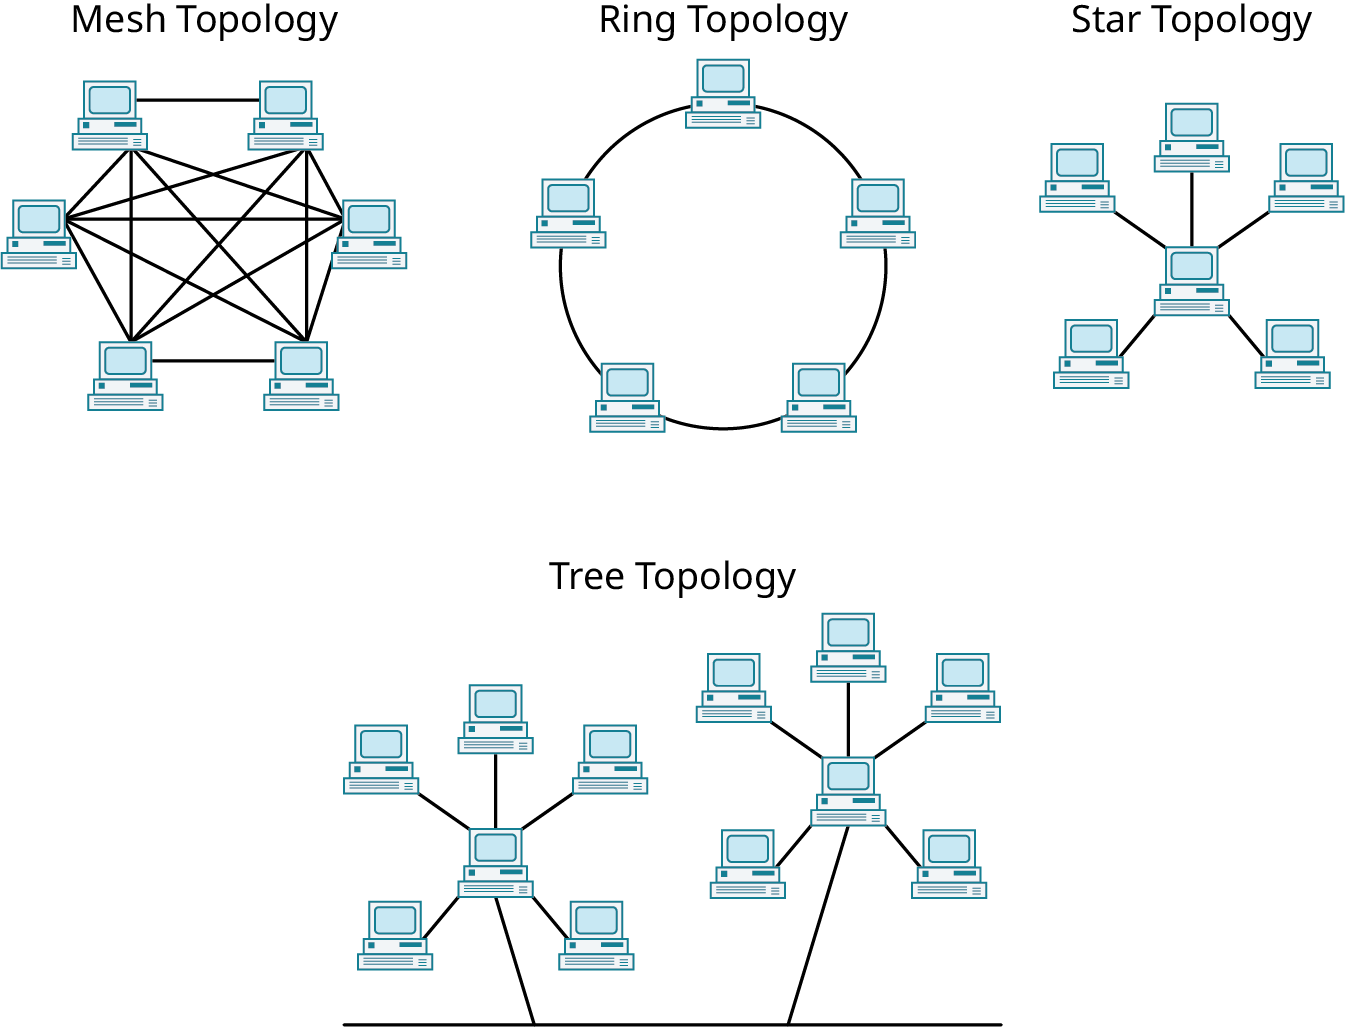 Four illustrations represent the common network configurations. The first illustration represents mesh topology. Six computers are interconnected. The second illustration represents a ring topology. Five computers are connected in a ring. The third illustration represents star topology. A computer at the center is connected to five computers surrounding it. The fourth illustration represents tree topology. Two branches arise from a horizontal bus. Each branch has a computer at the center connected to five computers surrounding it